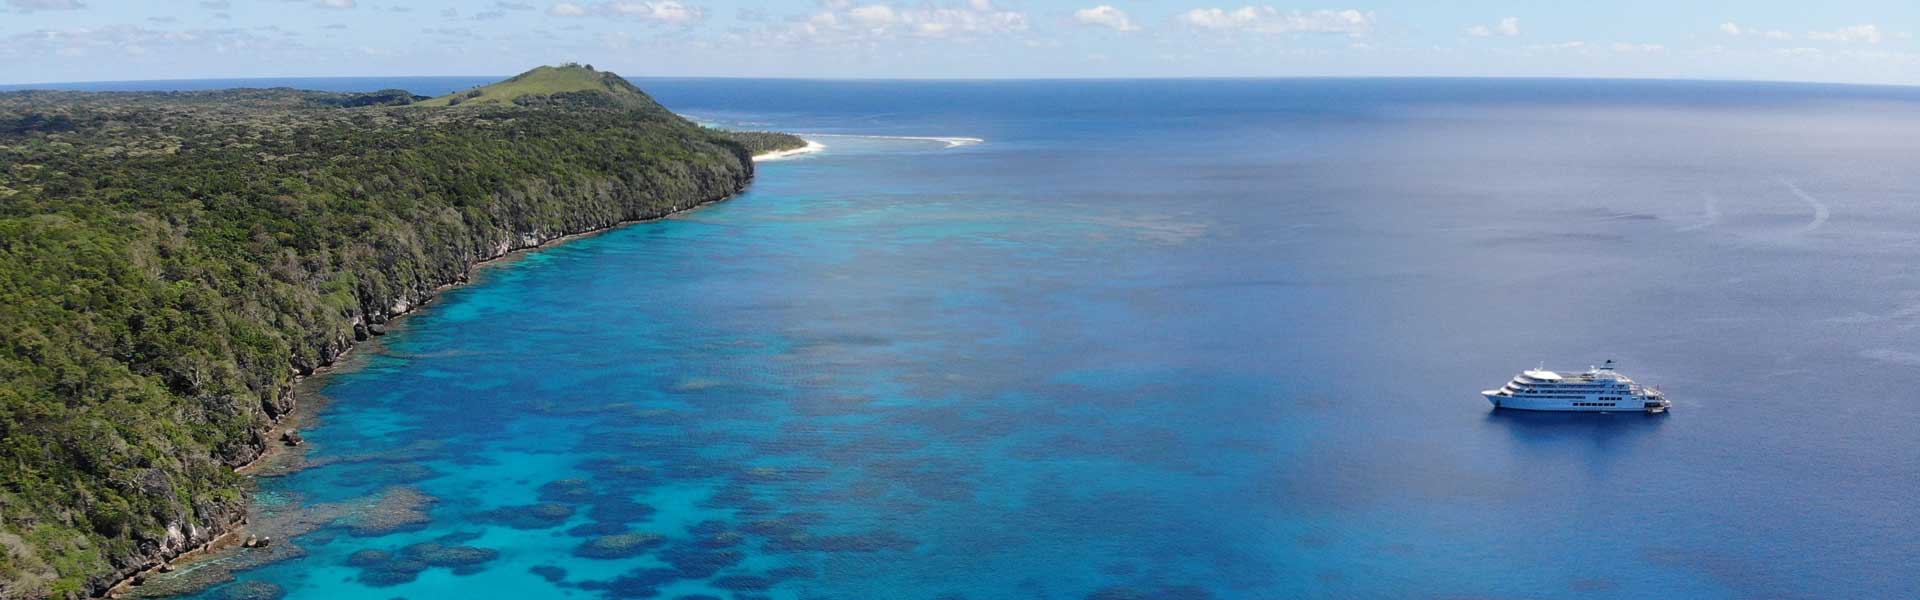 9 Nights Family Package (7 Nights Lau & Kadavu Discovery Cruise) with Flights, Transfers and More!